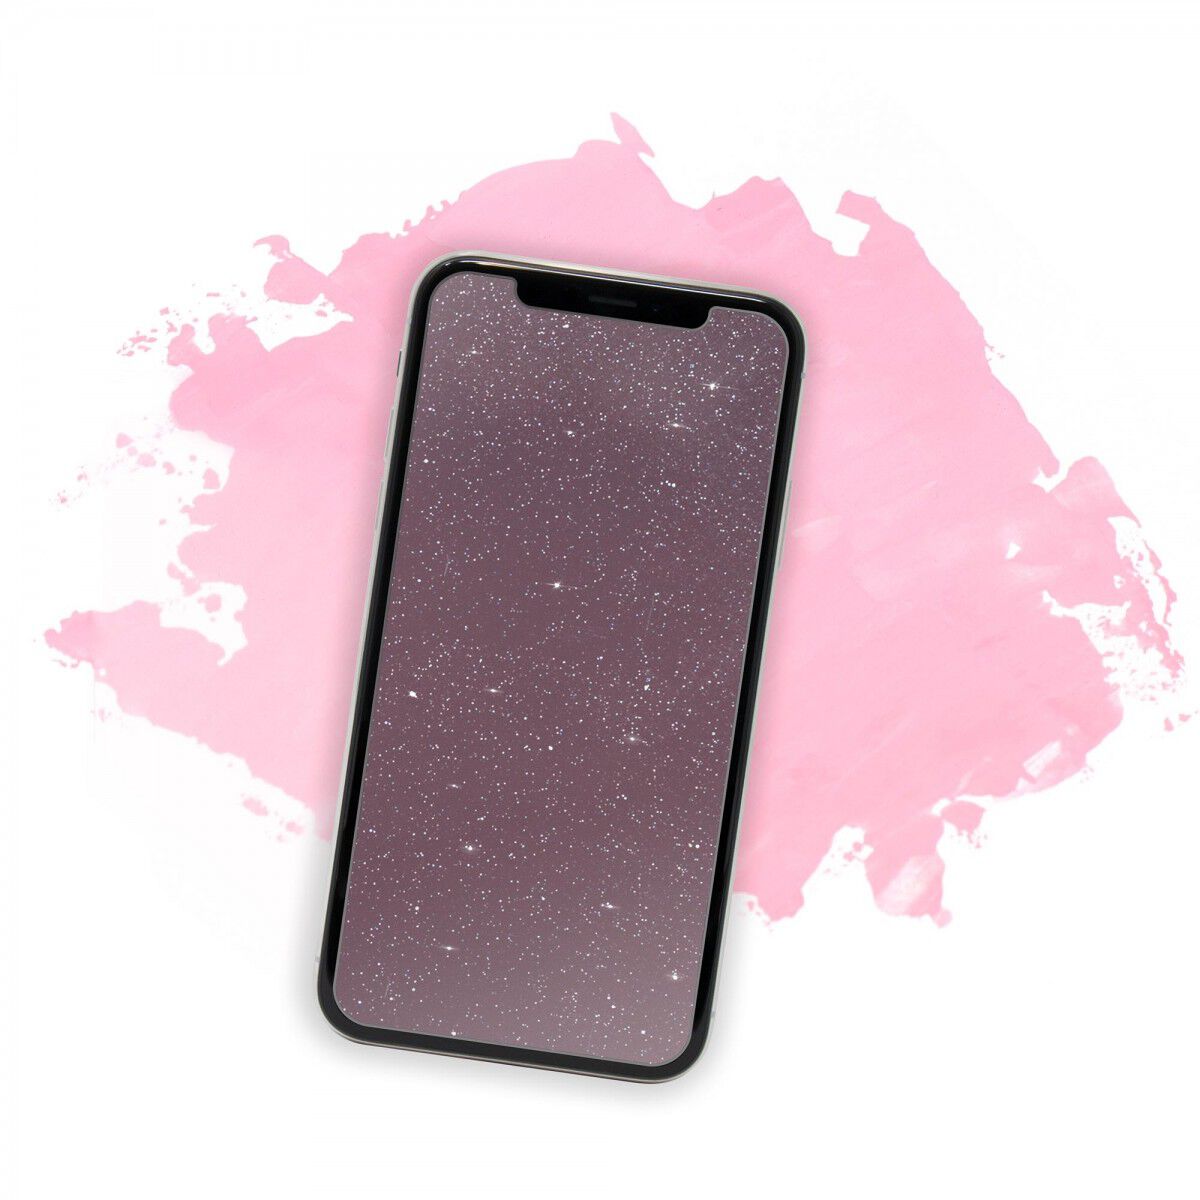 Showtime Glitter Glass (Pink) for Apple iPhone X